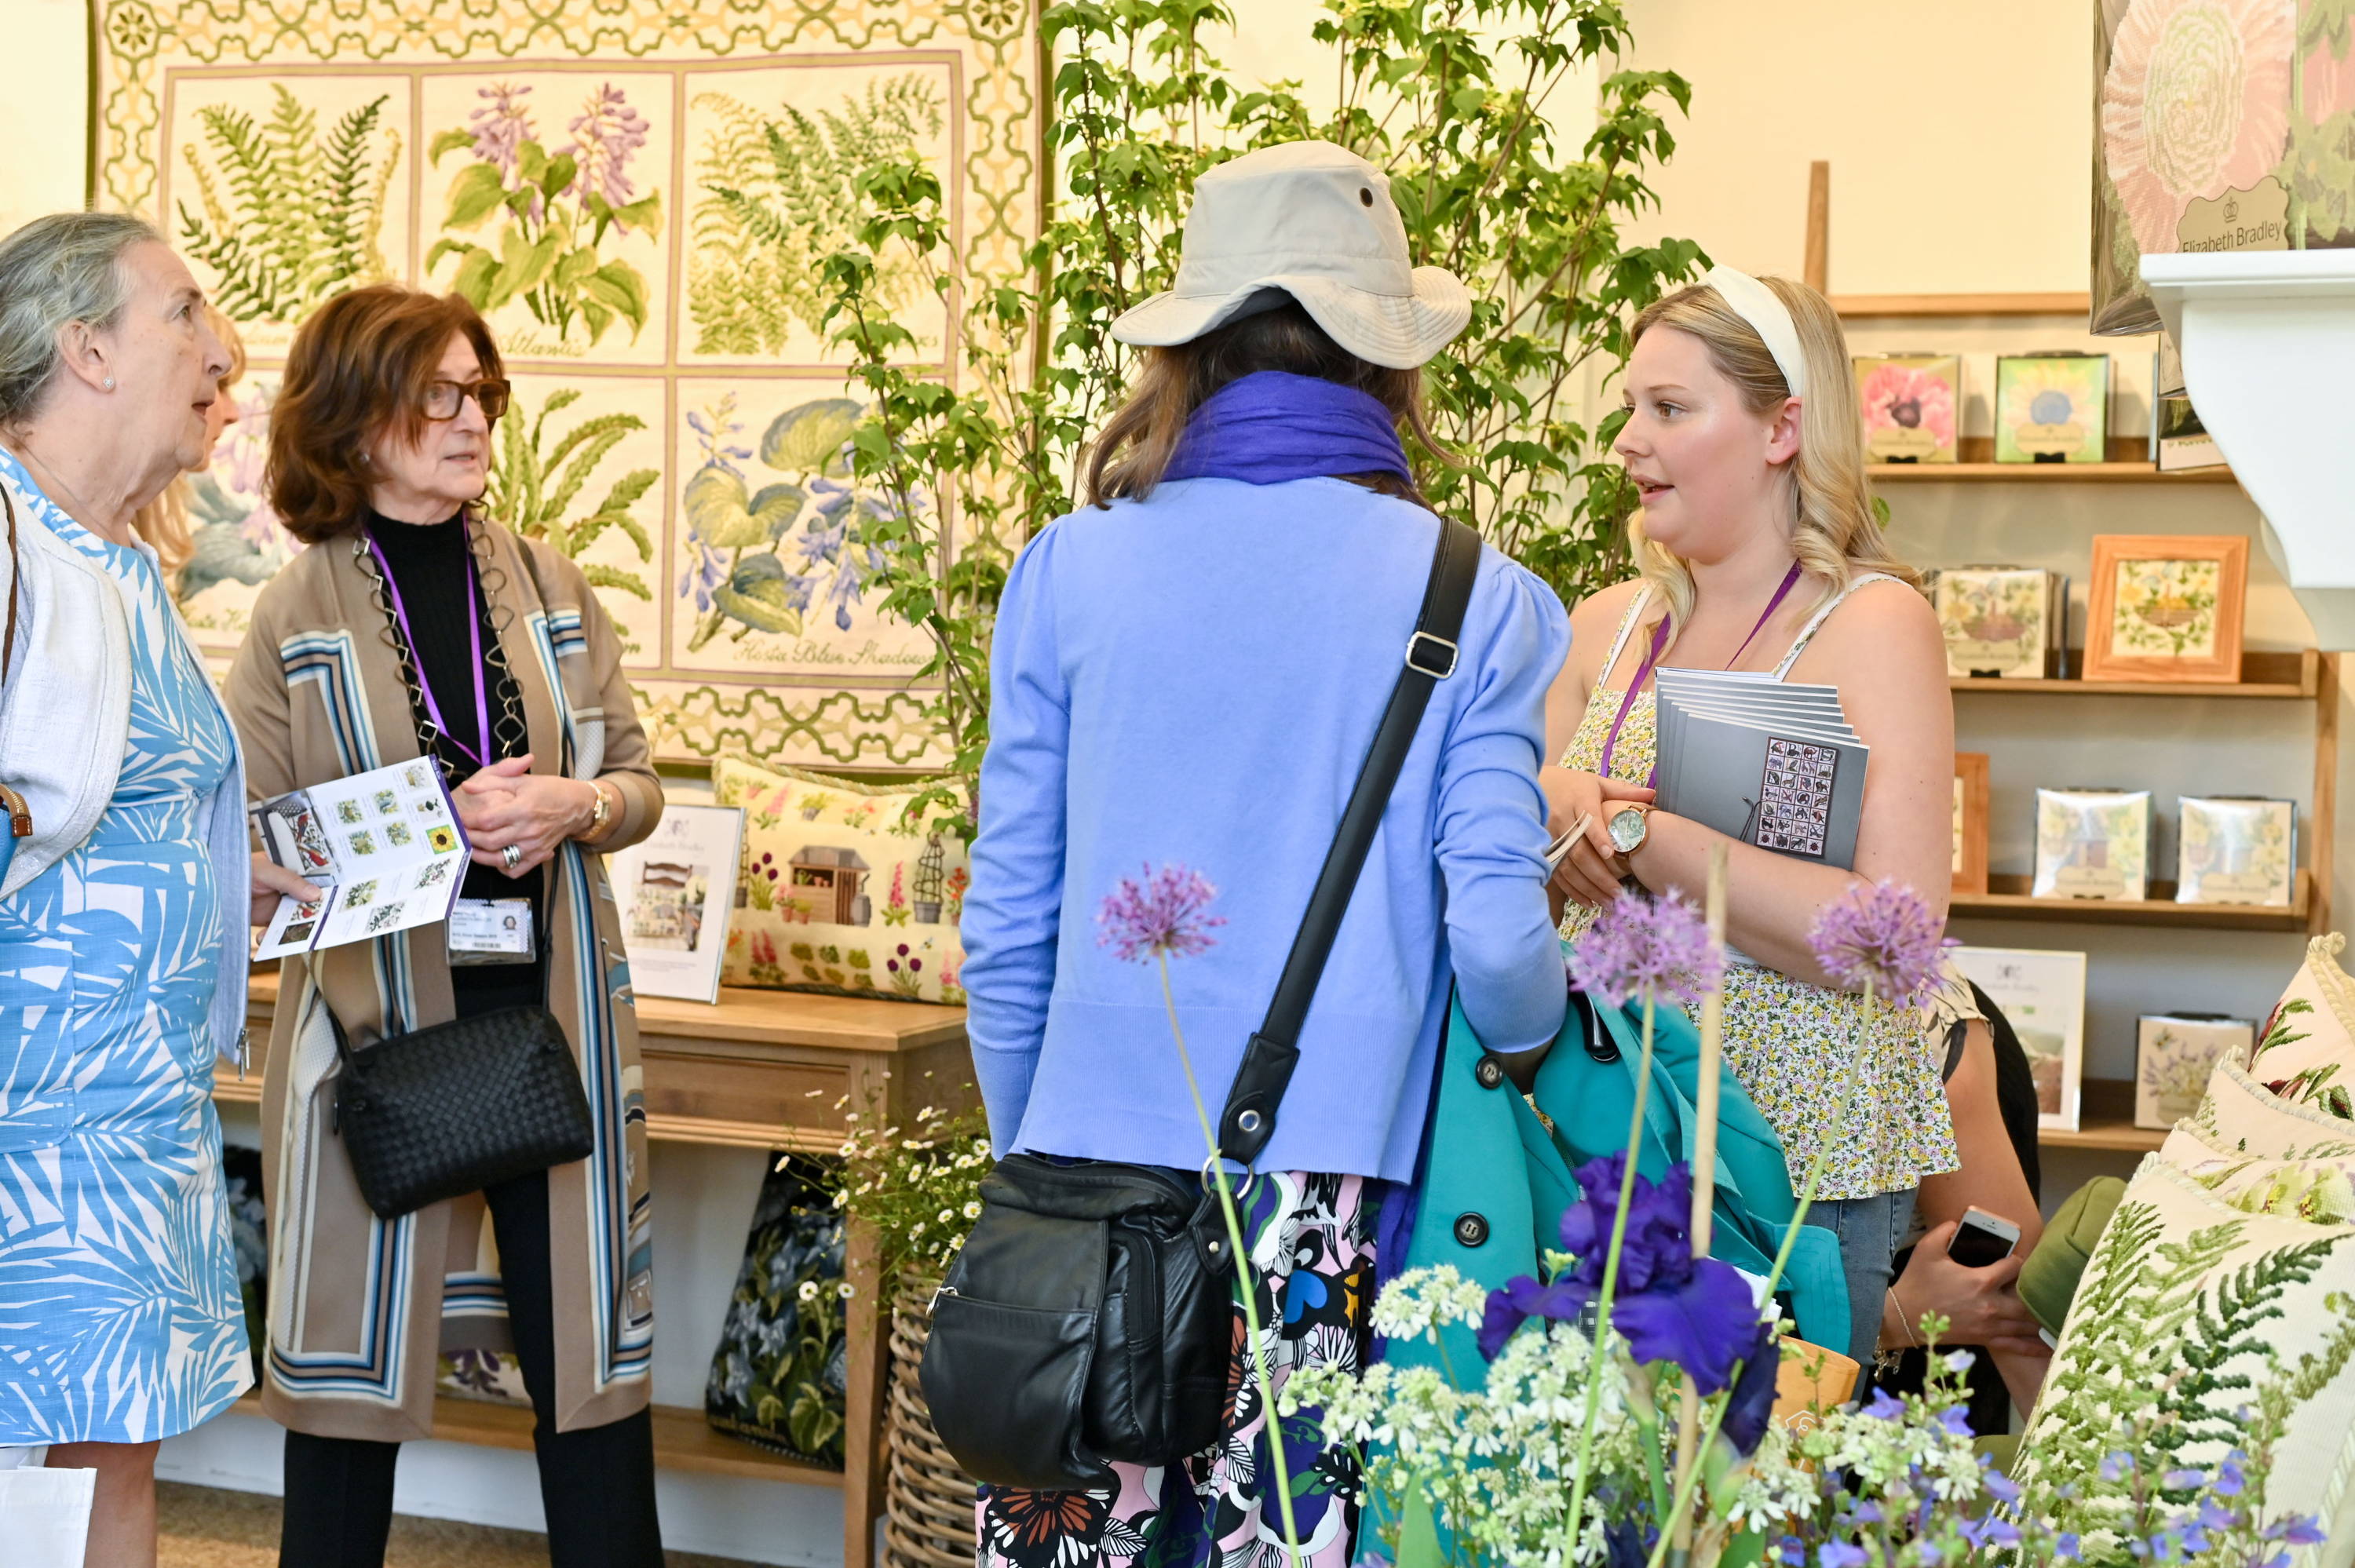 Customers being helped at the Elizabeth Bradley Chelsea Flower show booth